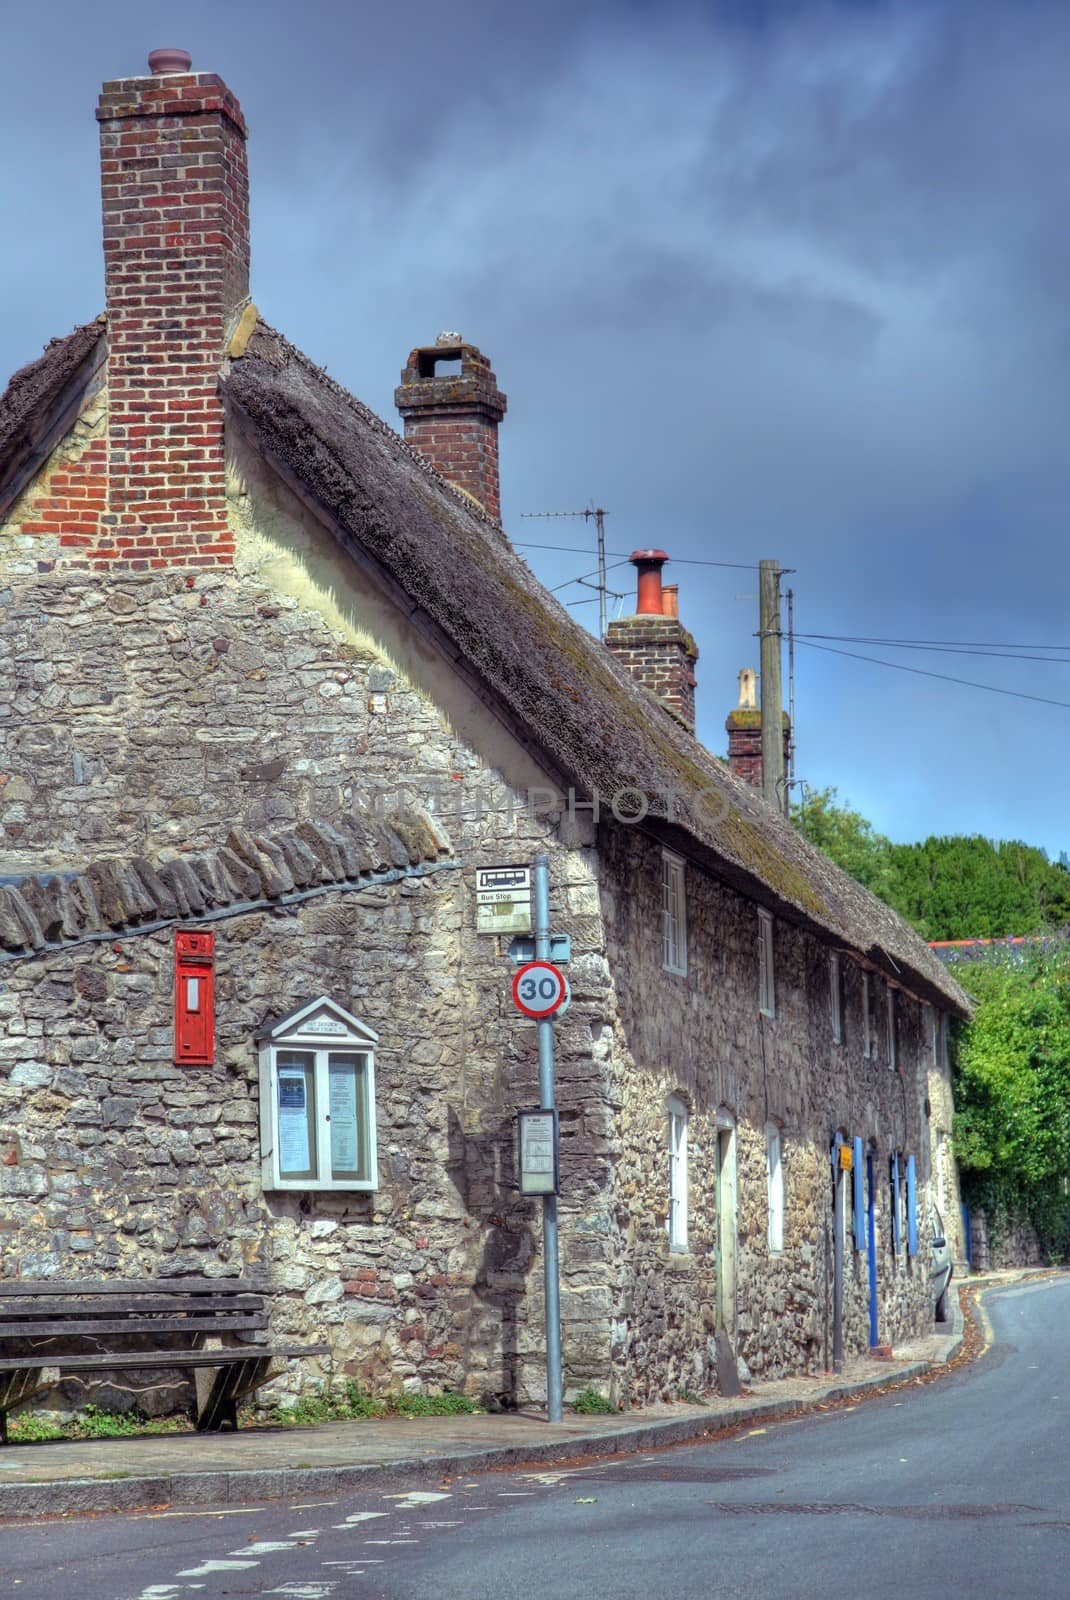 Dorset cottages by andrewroland